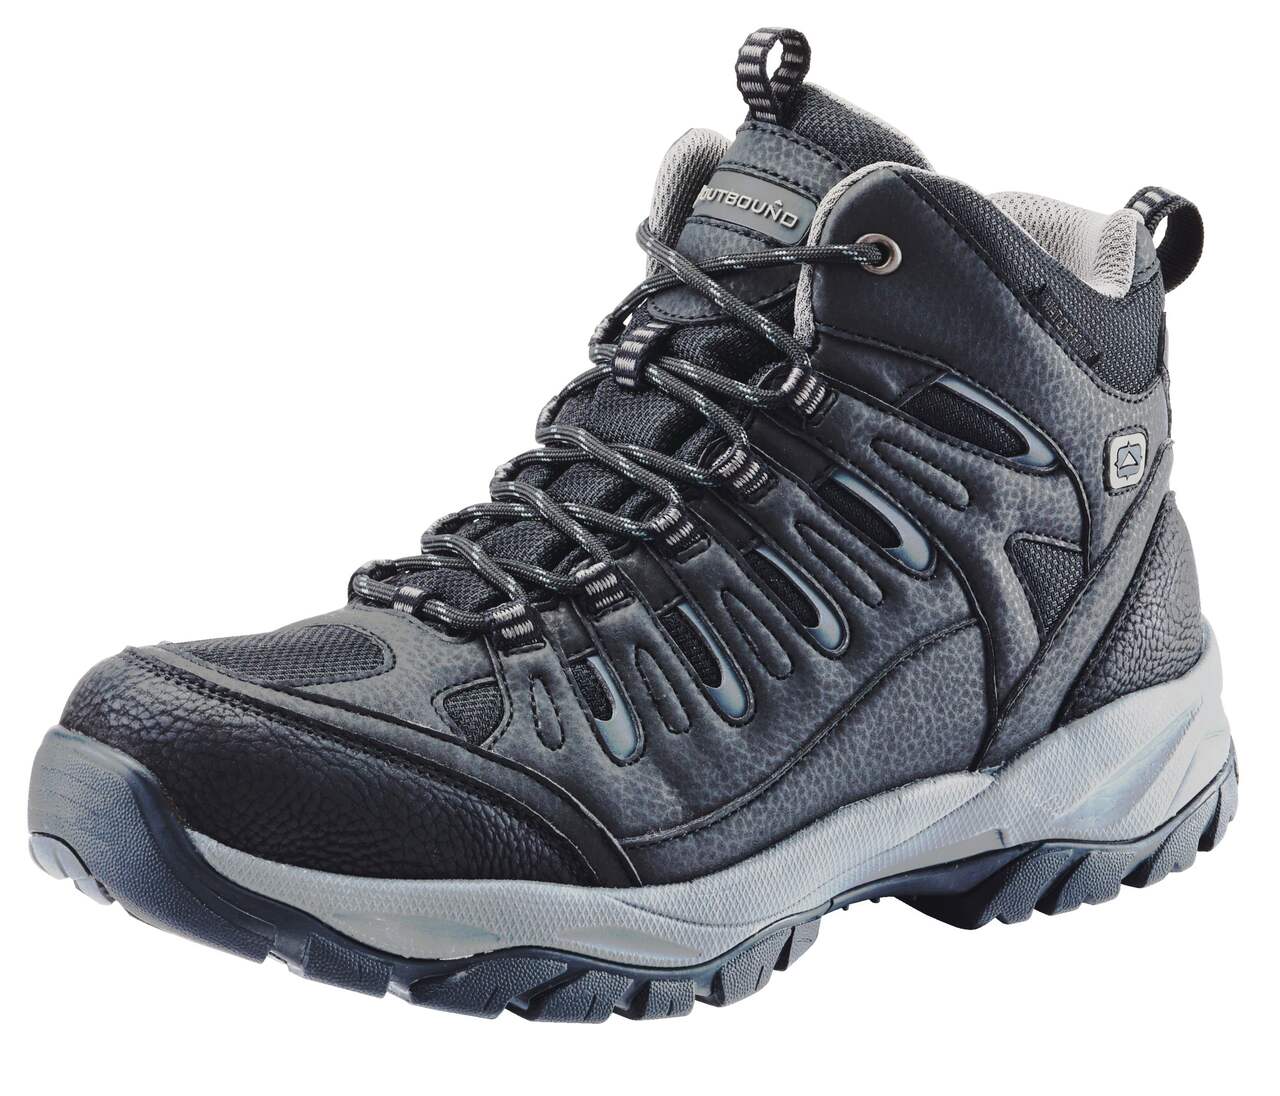 Outbound Men's Traverse Mid-Cut Waterproof Breathable Hiking Boots, Black